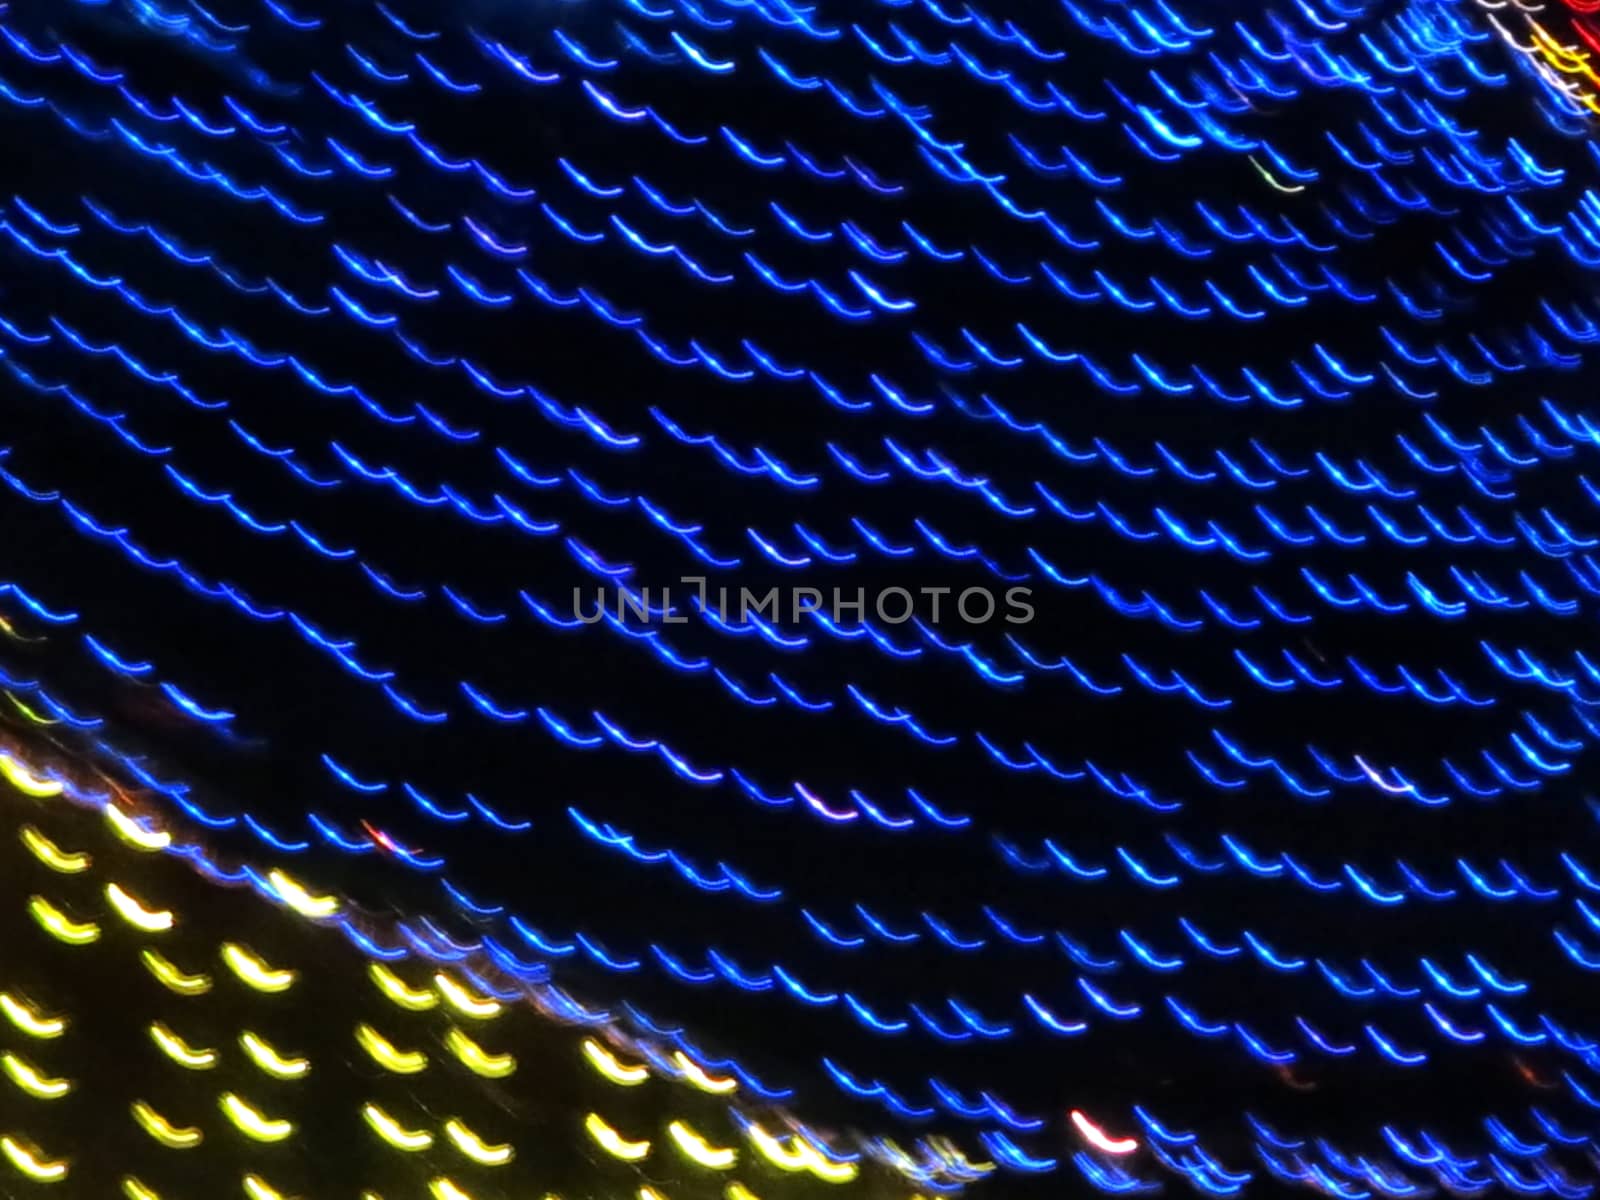 Patterns, lines of blue and yellow lights